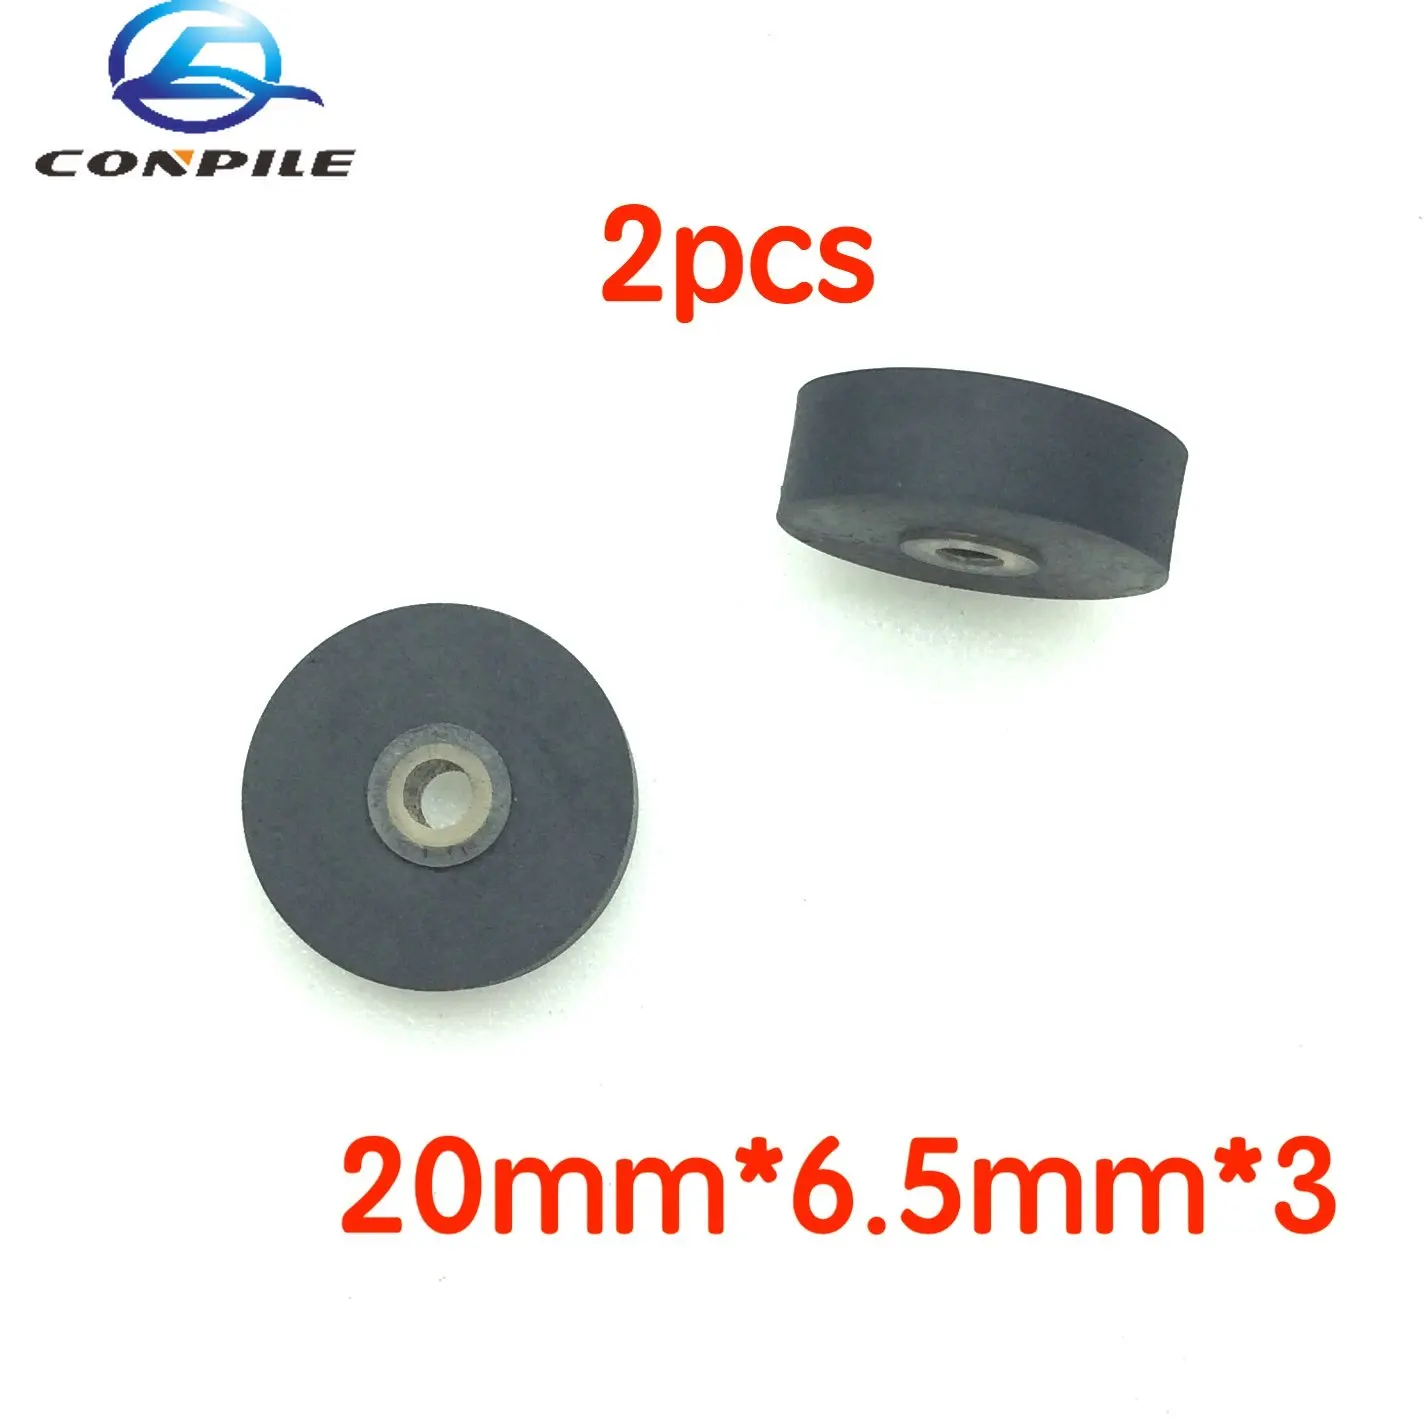 2pcs 20mm*6.5mm*3 wheel belt pulley rubber audio pressure pinch roller for vintage cassette deck tape recorder Stereo player